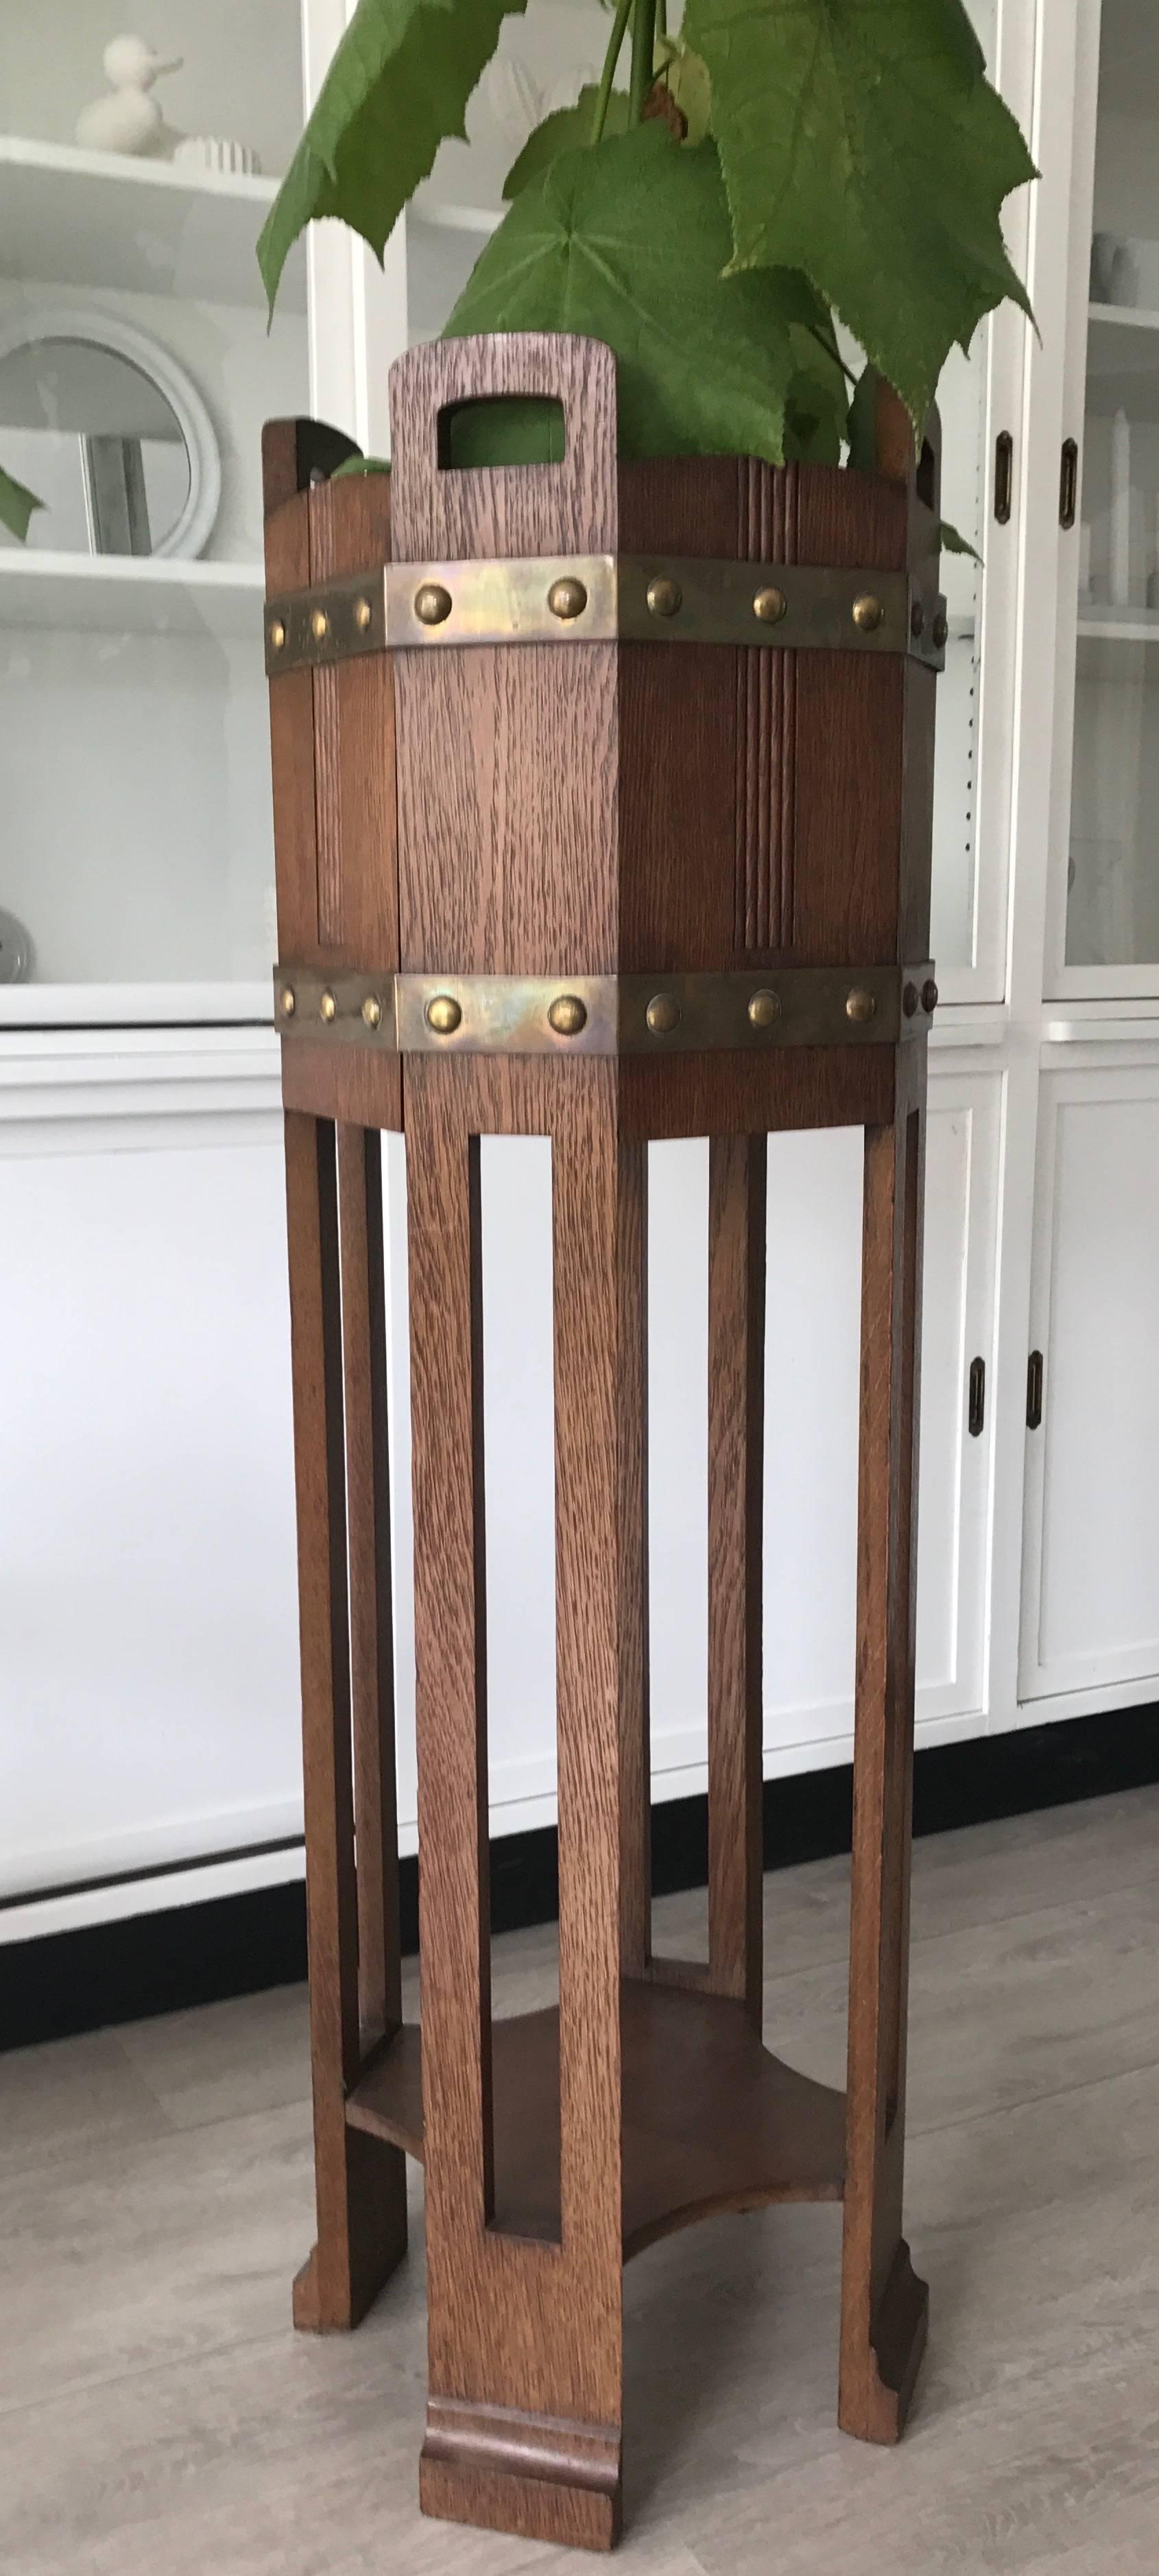 20th Century Large Arts & Crafts Hand-Crafted Oak Jardiniere / Plant Stand with Copper Bands For Sale